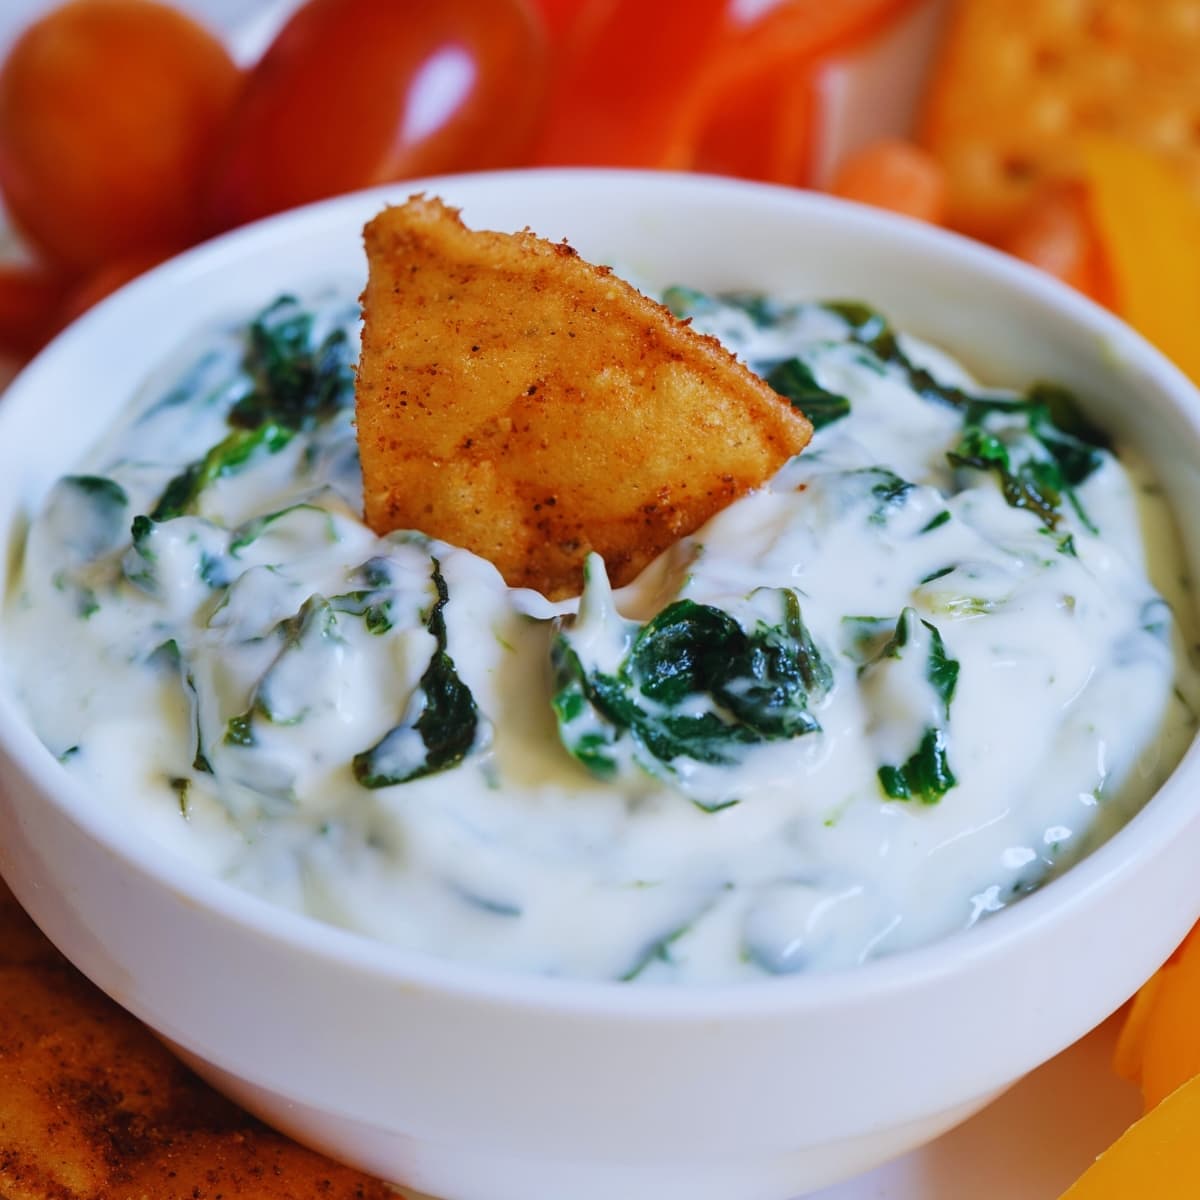 Cracker dipped on a bowl of Knorr Spinach Dip